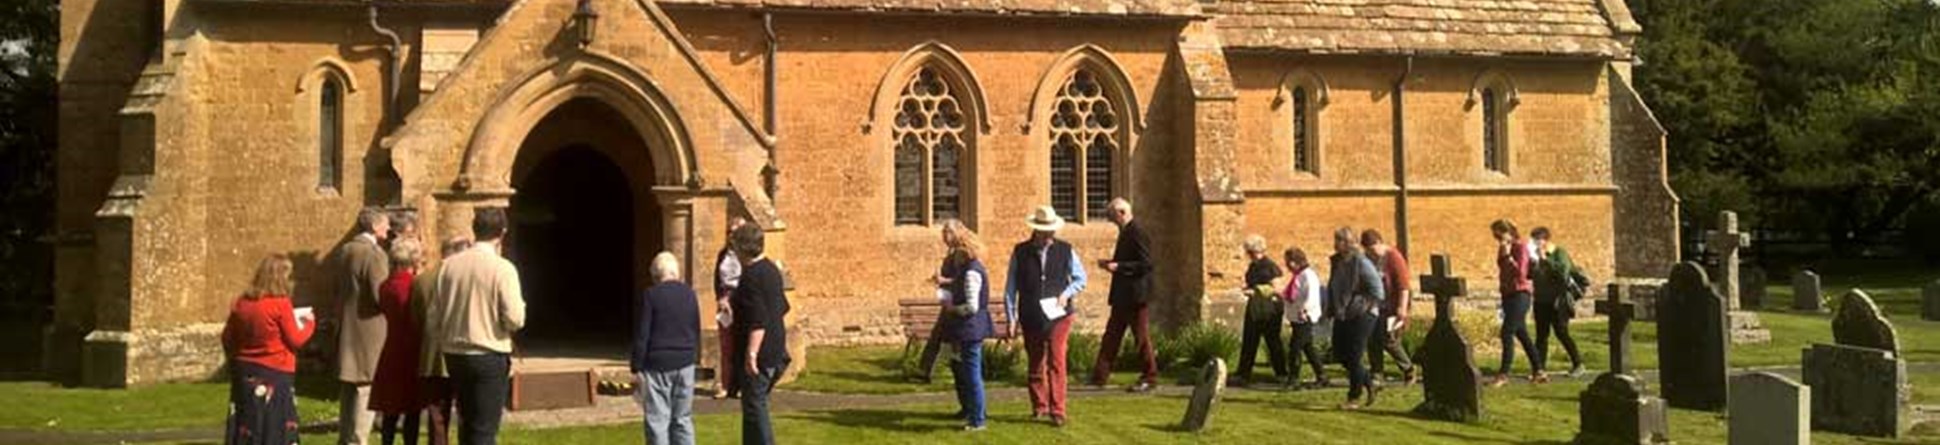 A photograph of people gathering outside a small, honey-coloured church set in a well-kept graveyard.